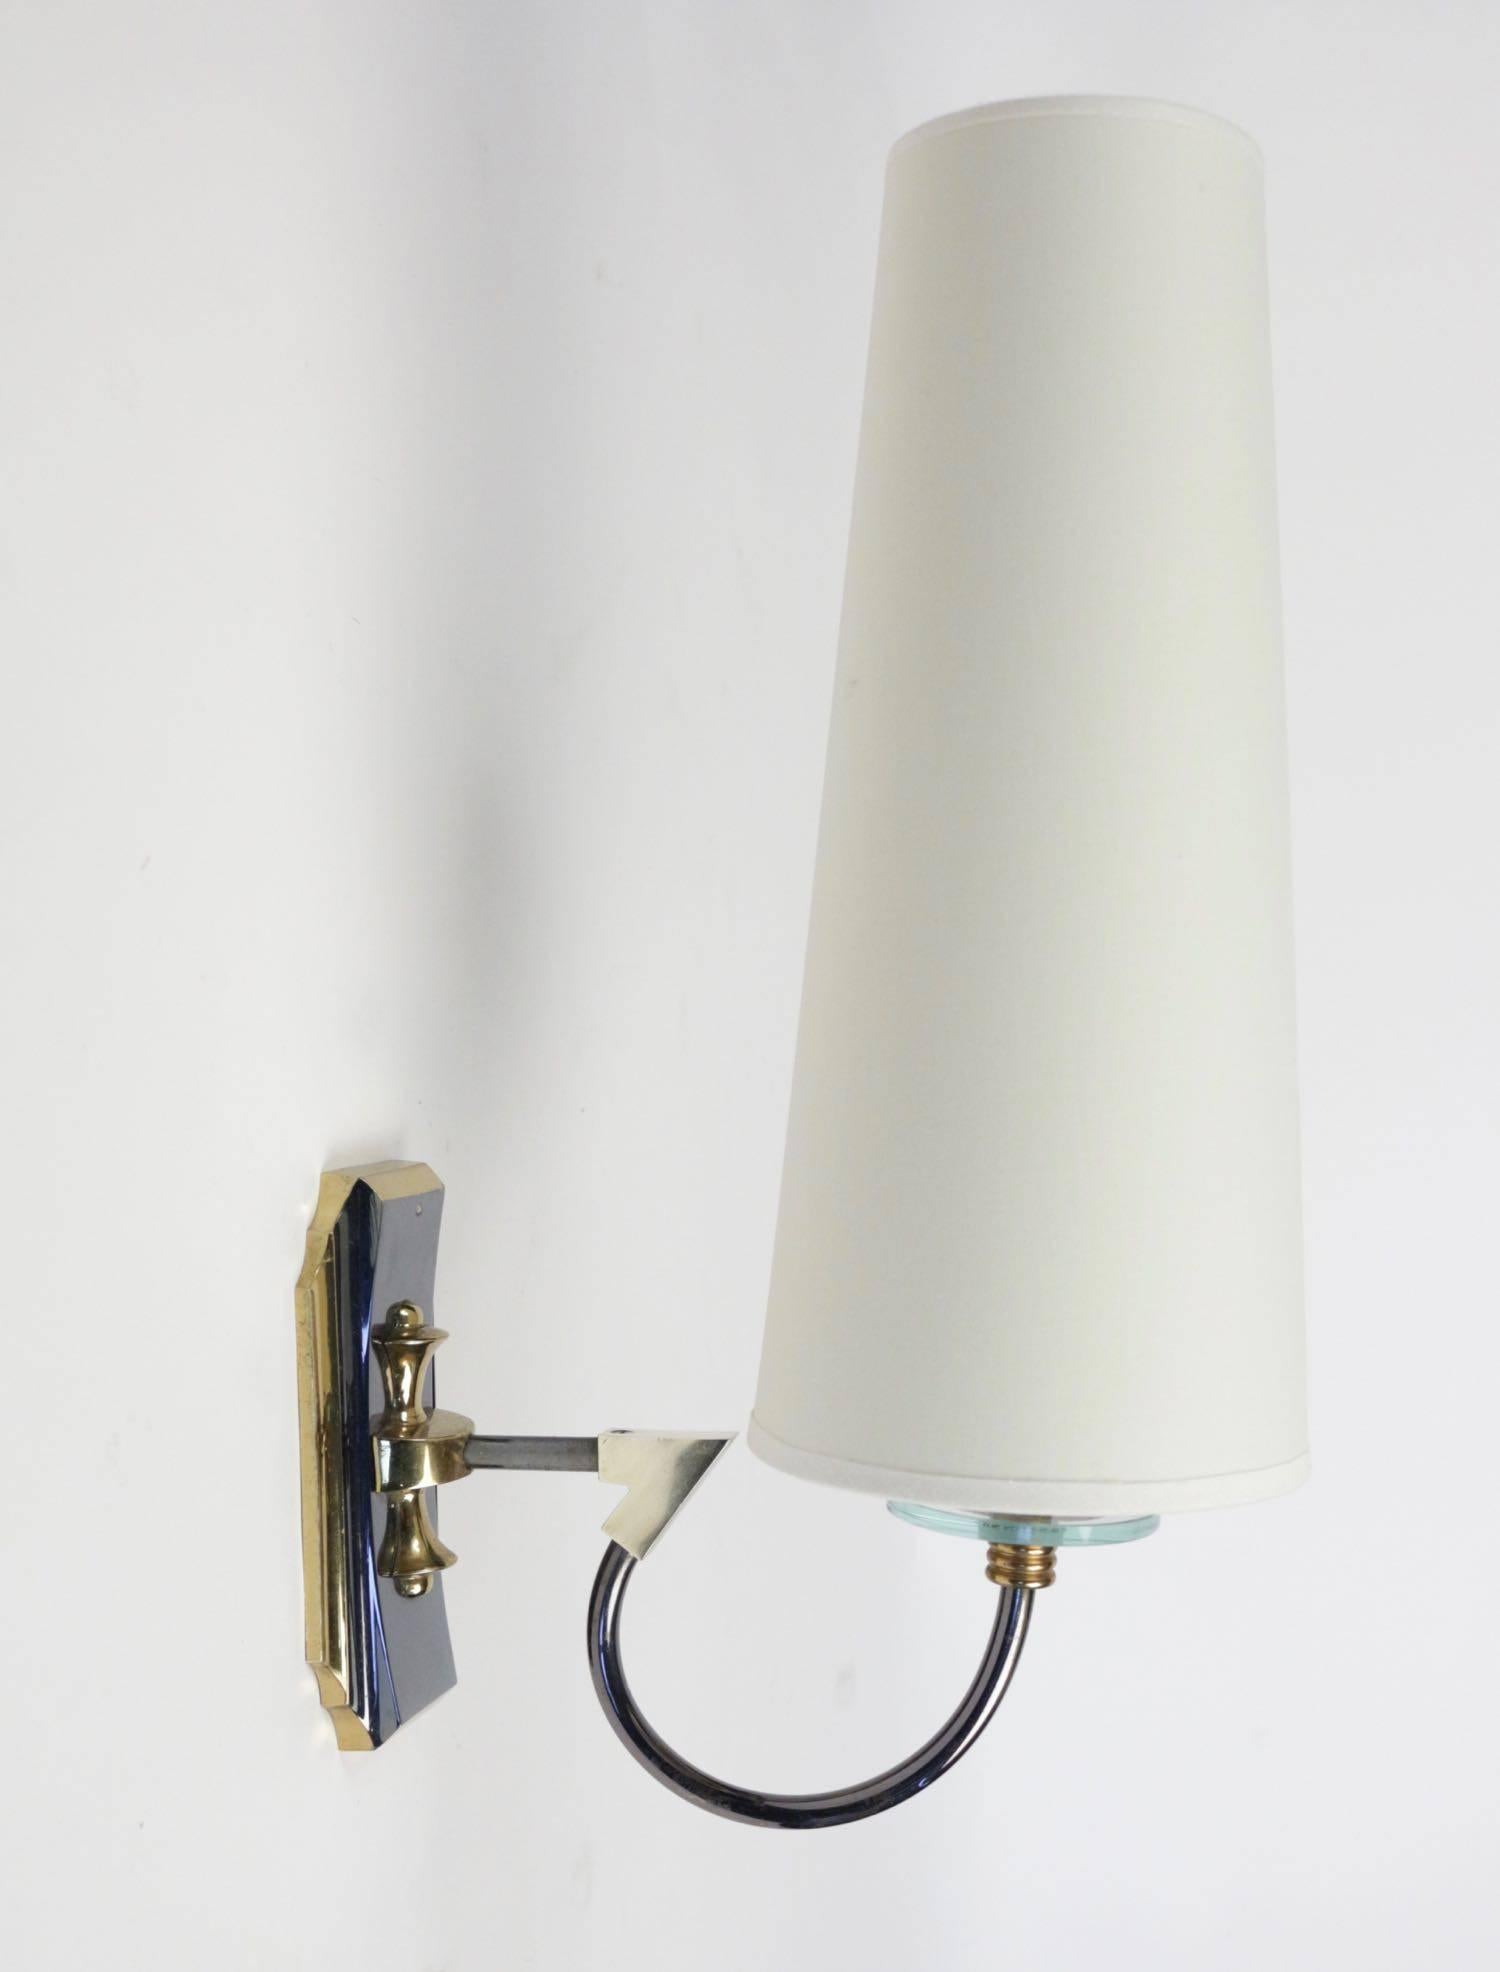 French Pair of Sconces by Mains Petitot, 1940